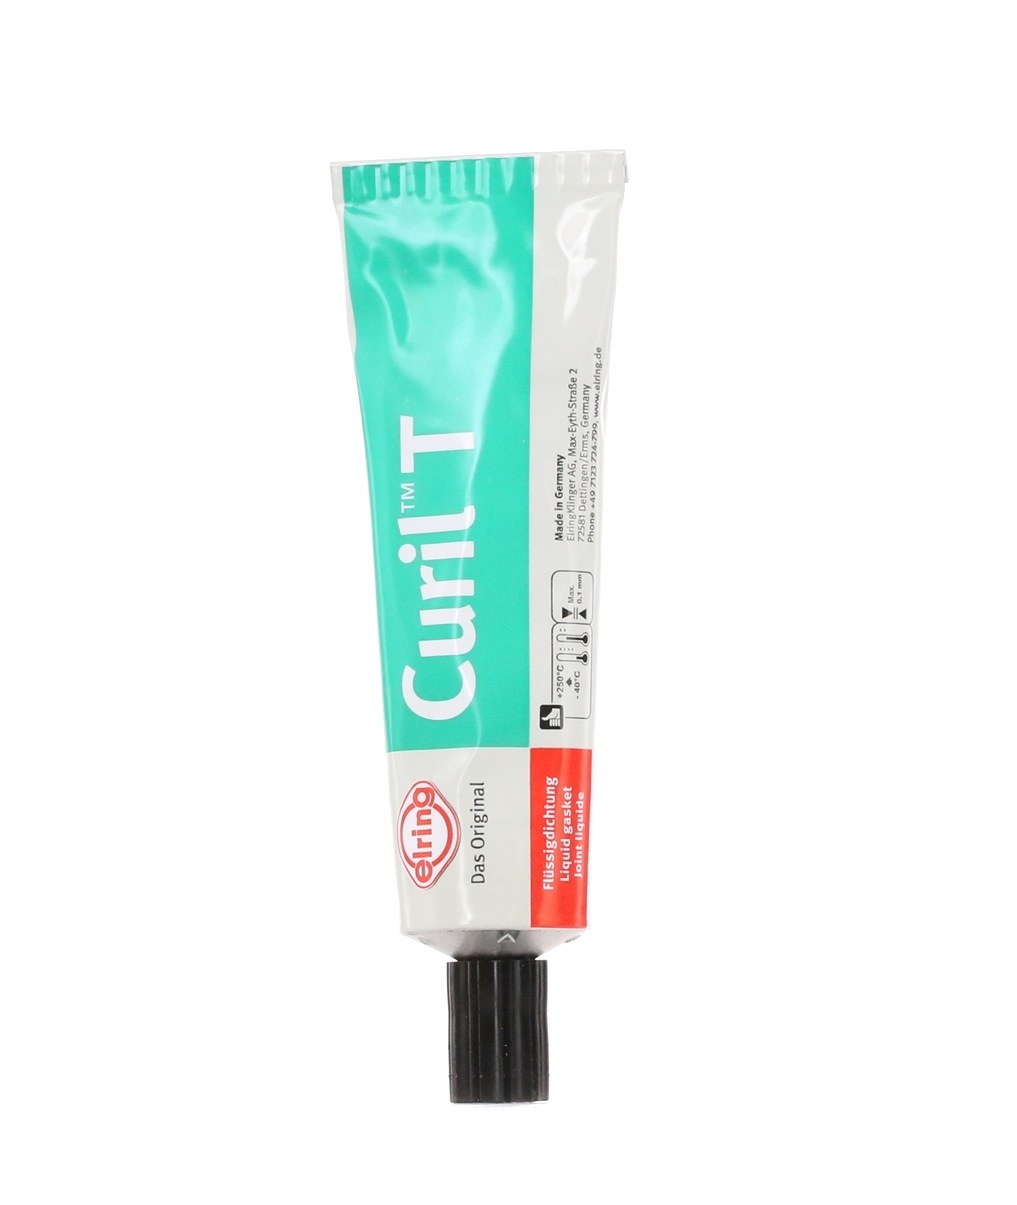 ELRING Curil T 471.170 Sealing Substance 81229400339